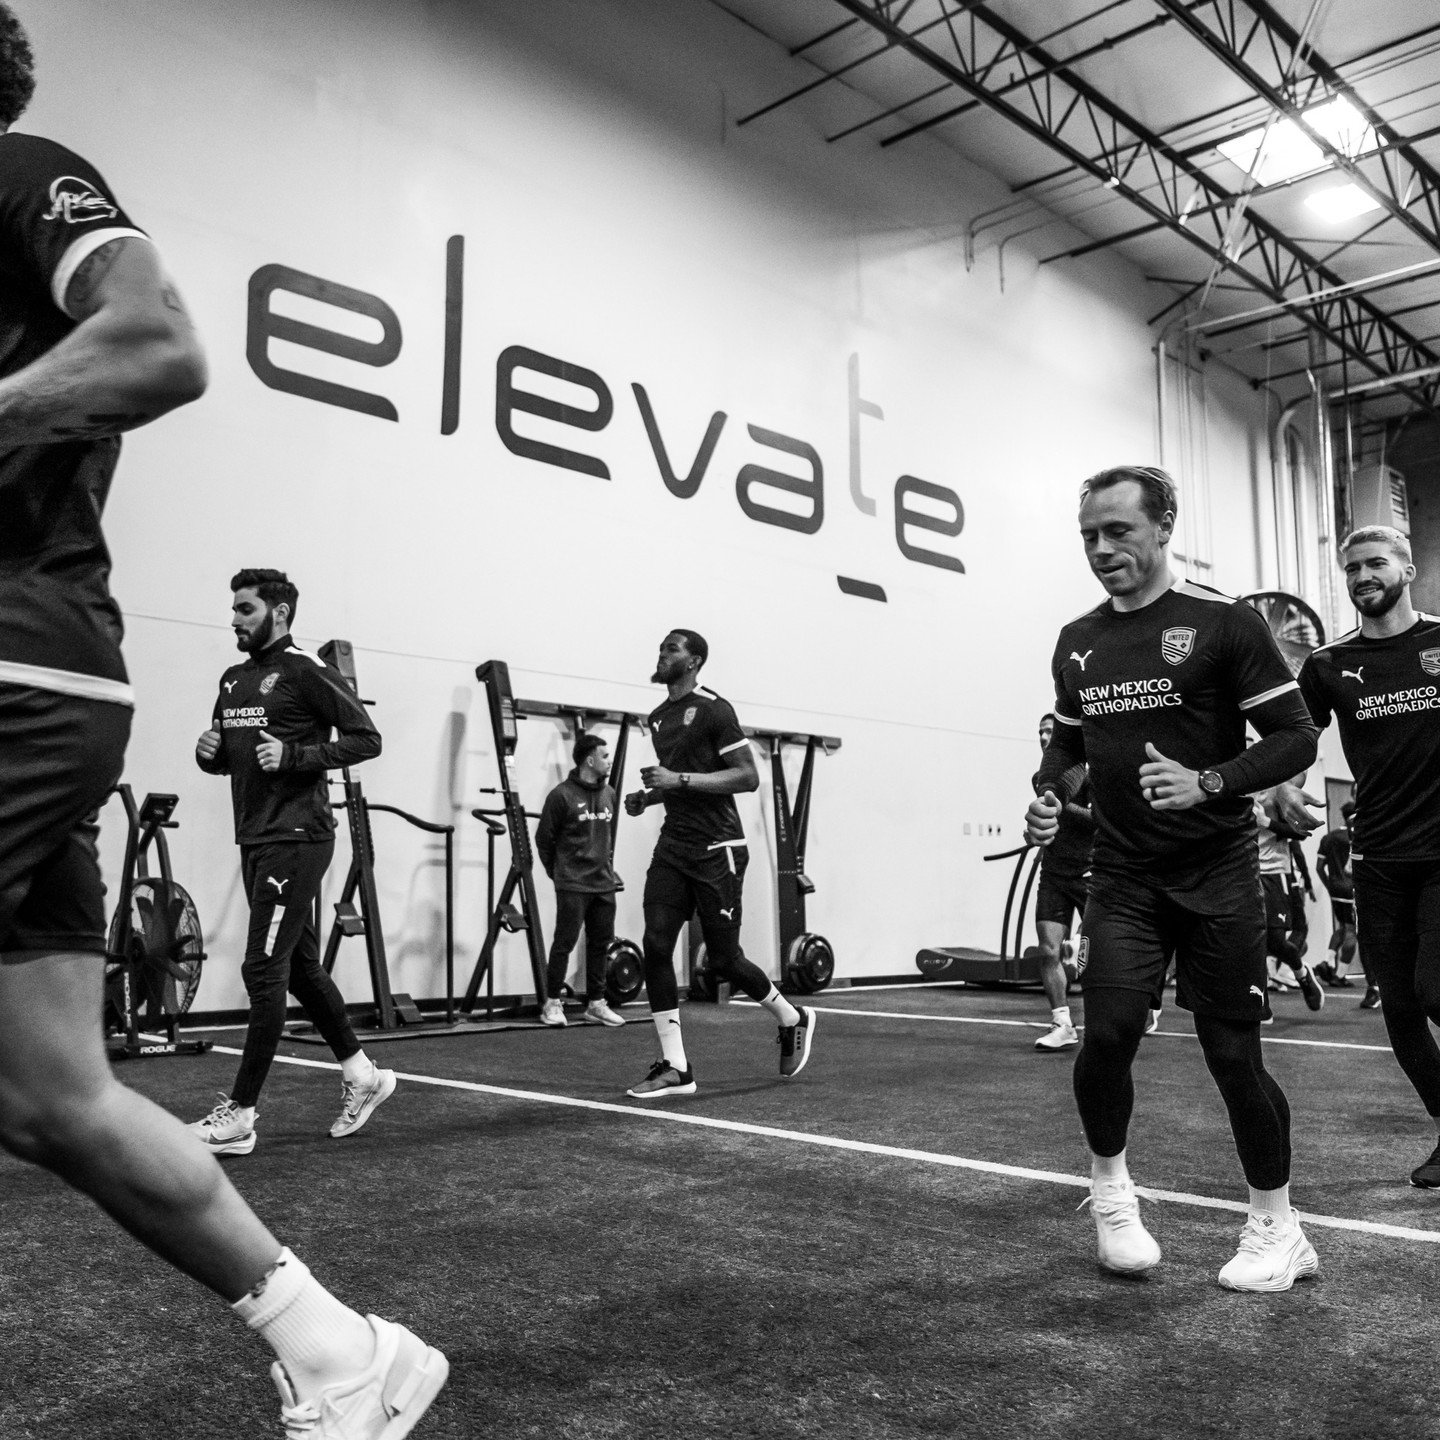 ✨Train like the Pros this summer✨

Elevate&rsquo;s Summer Youth Program is a perfect complement to sports-specific training. Summer is the time to develop, improve and focus on skills that directly and indirectly affect competitive performance.

At E